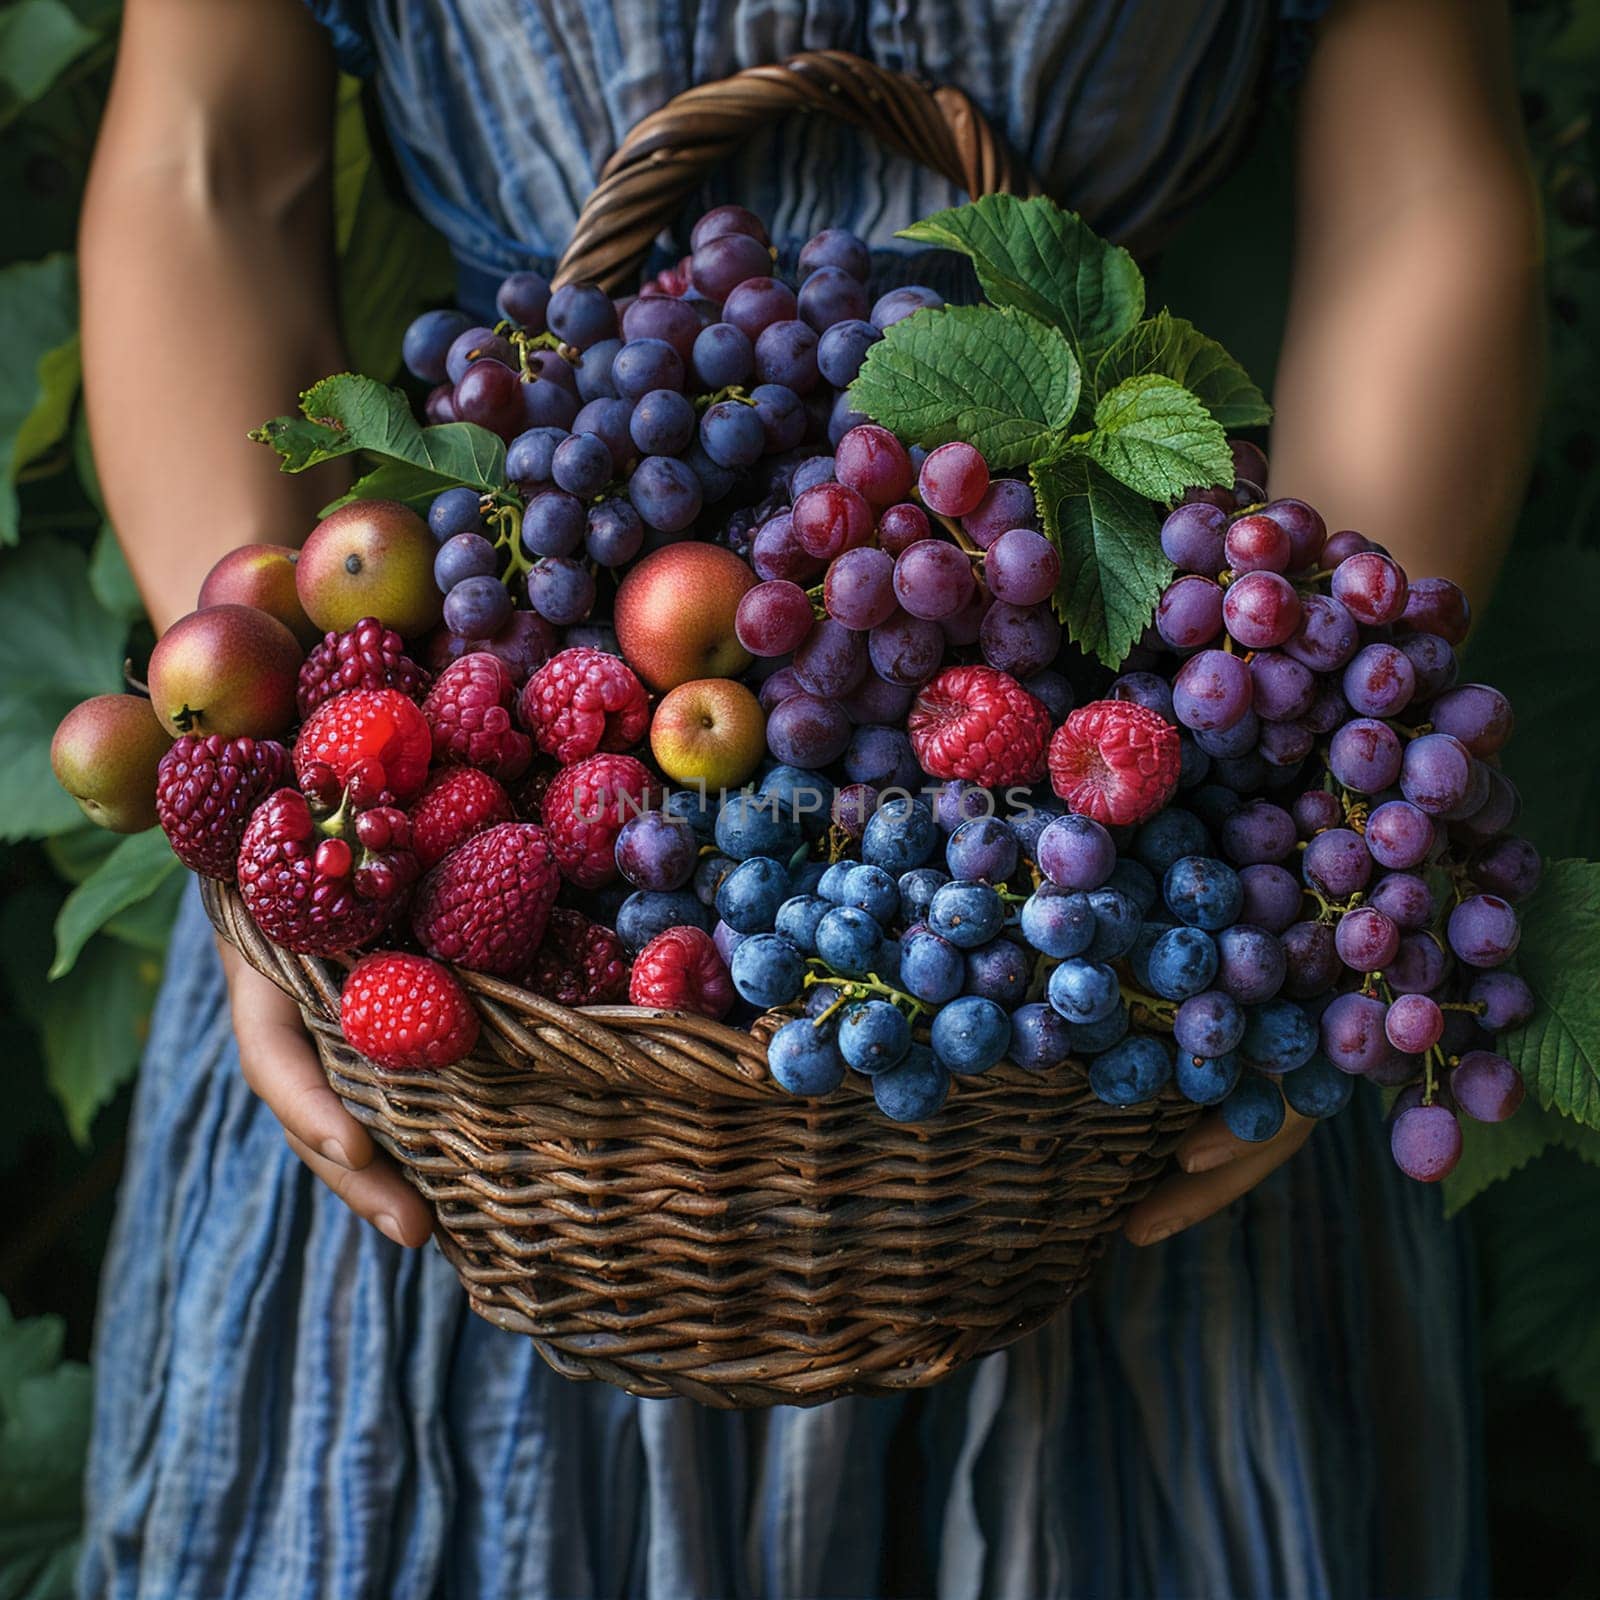 Handwoven Baskets Full of Freshly Picked Fruit The textures blur with the bounty by Benzoix